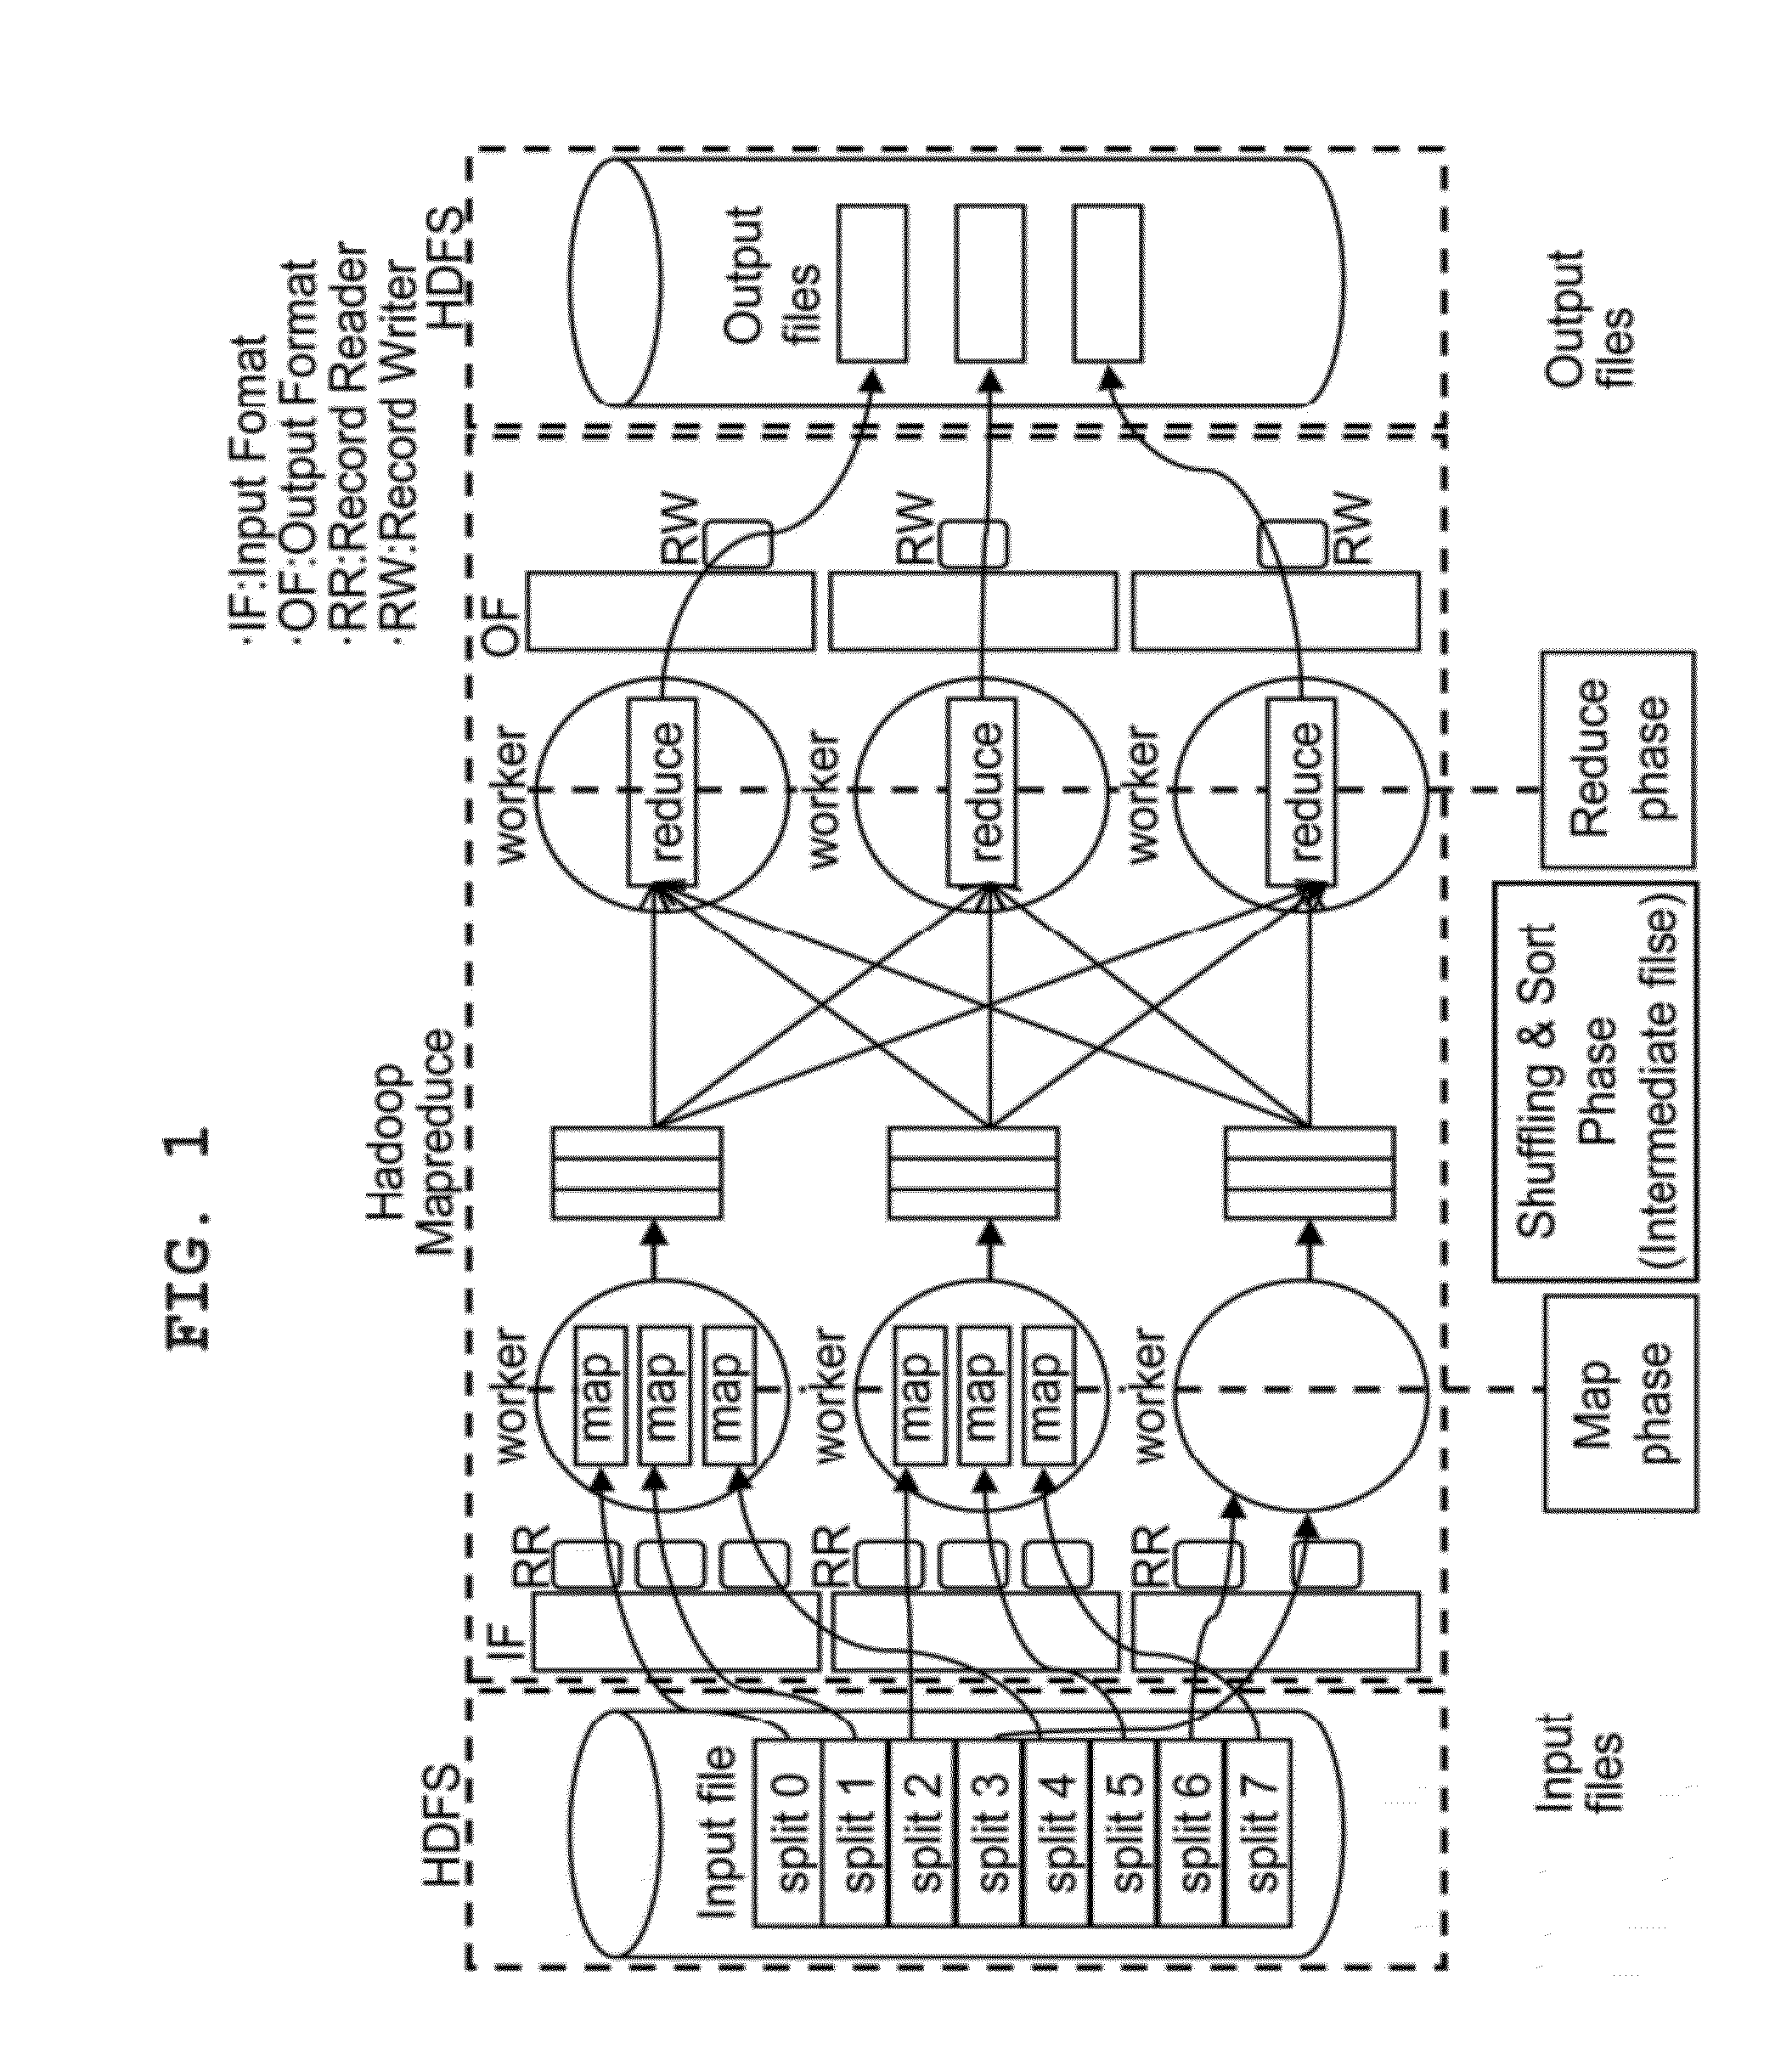 Packet analysis system and method using hadoop based parallel computation